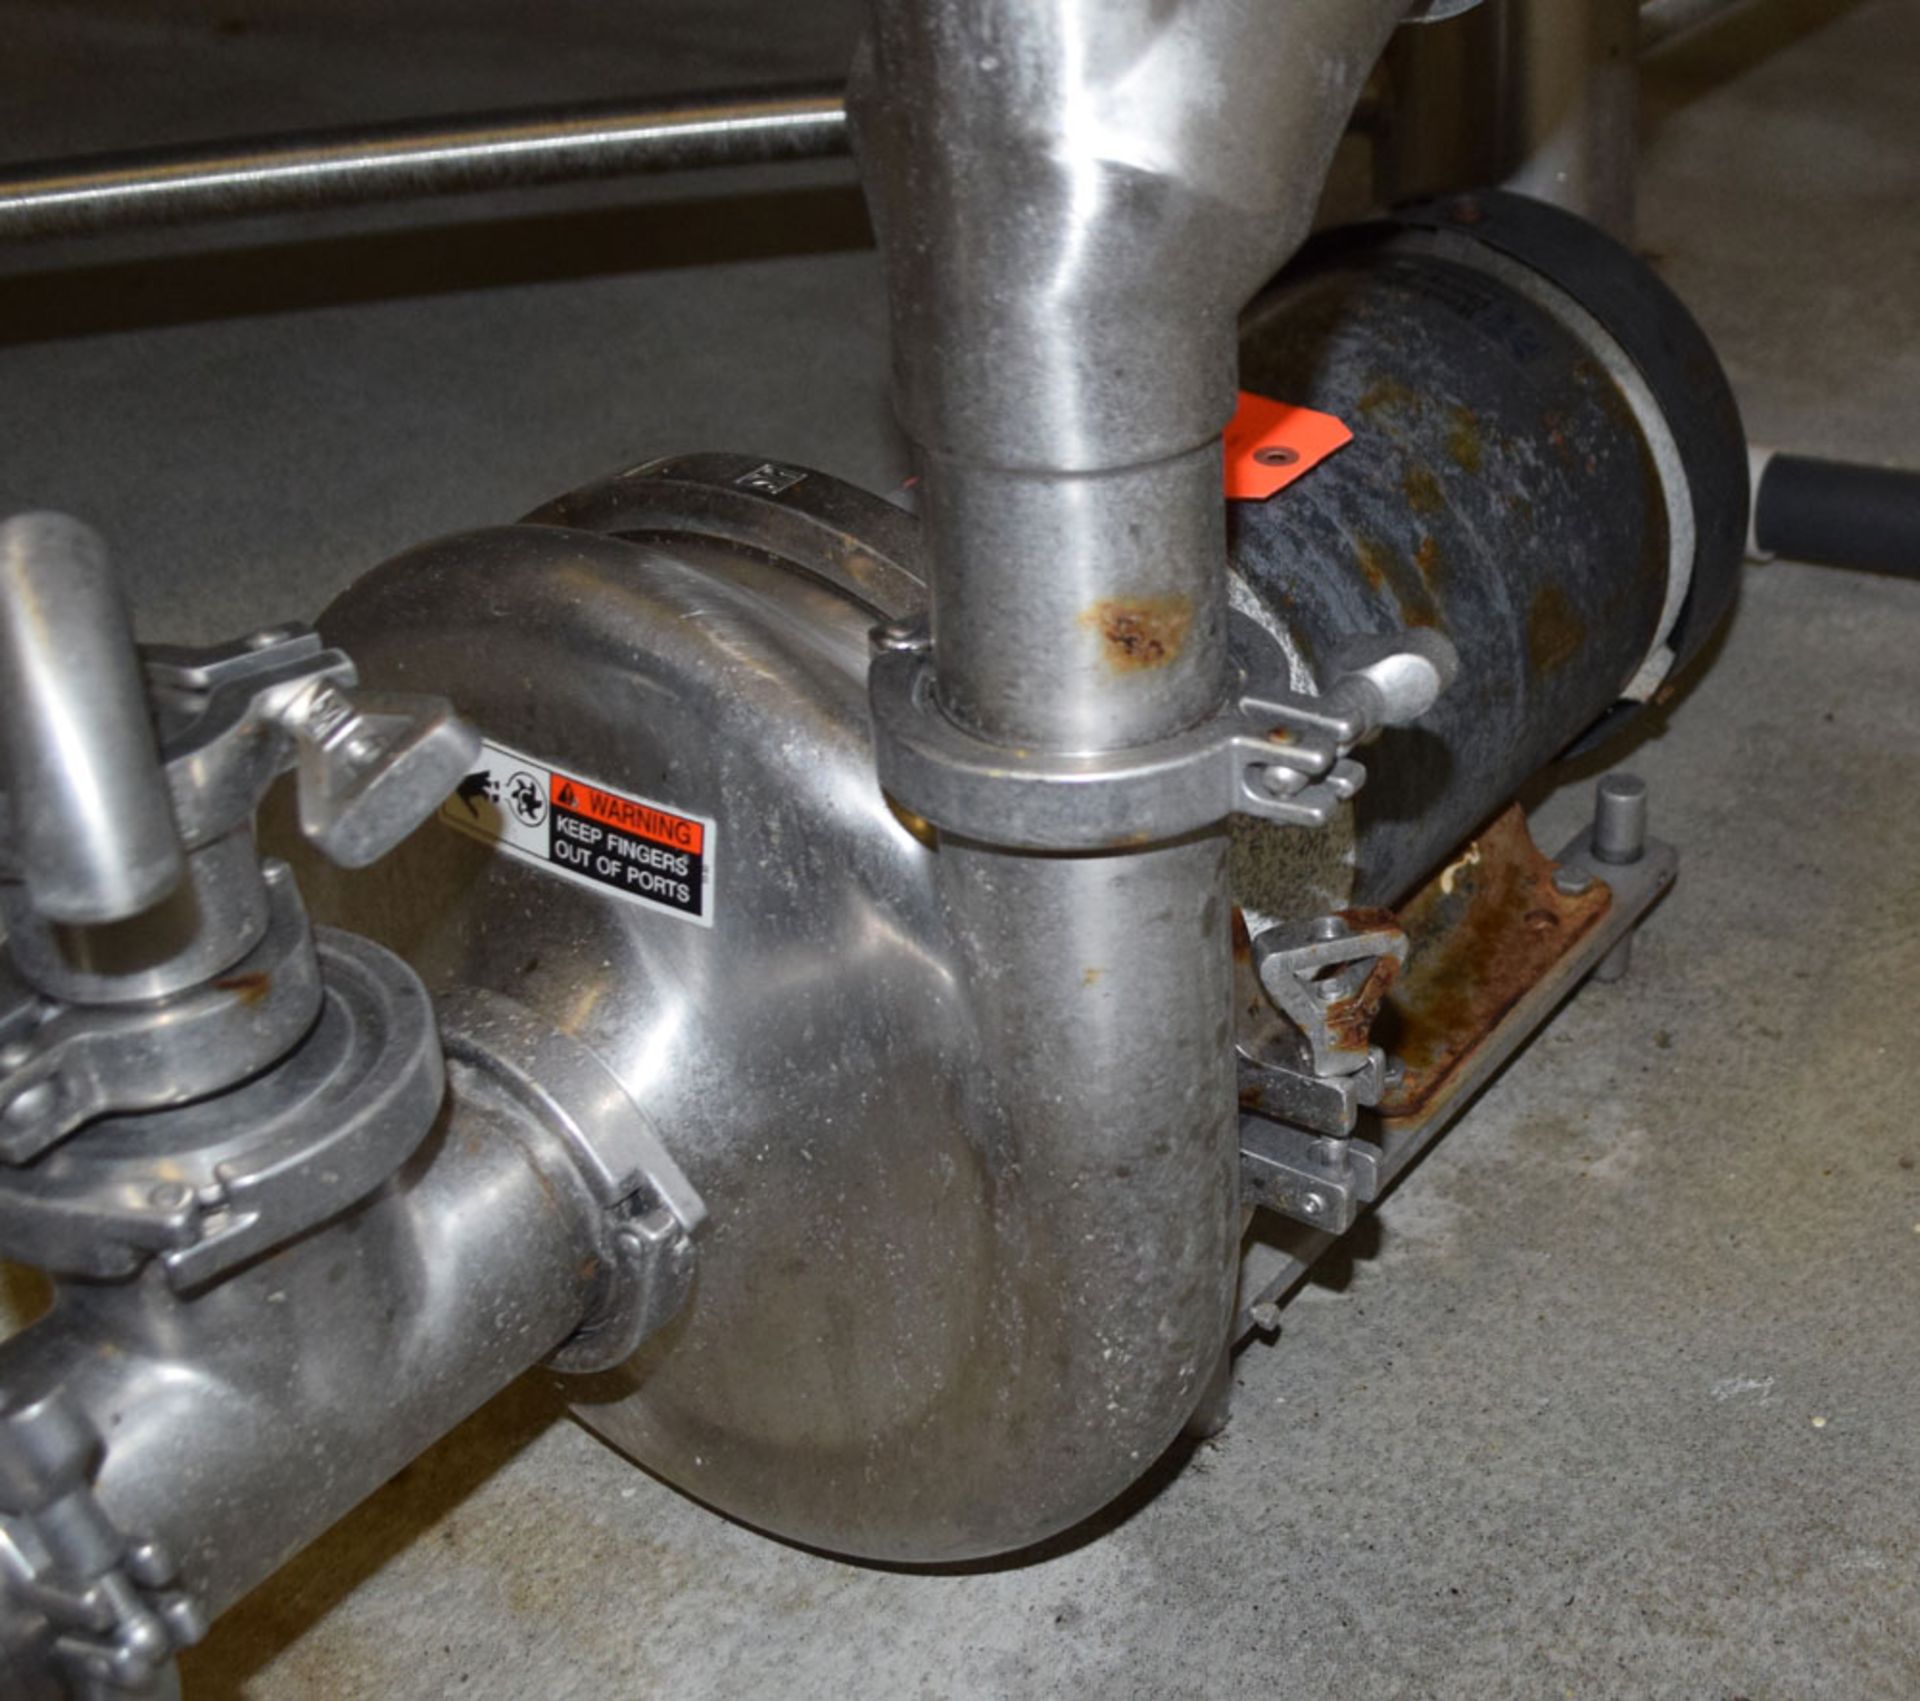 Waukesha 2085 Stainless Steel Centrifugal Pump with (Approx) 10 HP Motor; s/n: 465904 (2008) - - Image 2 of 4